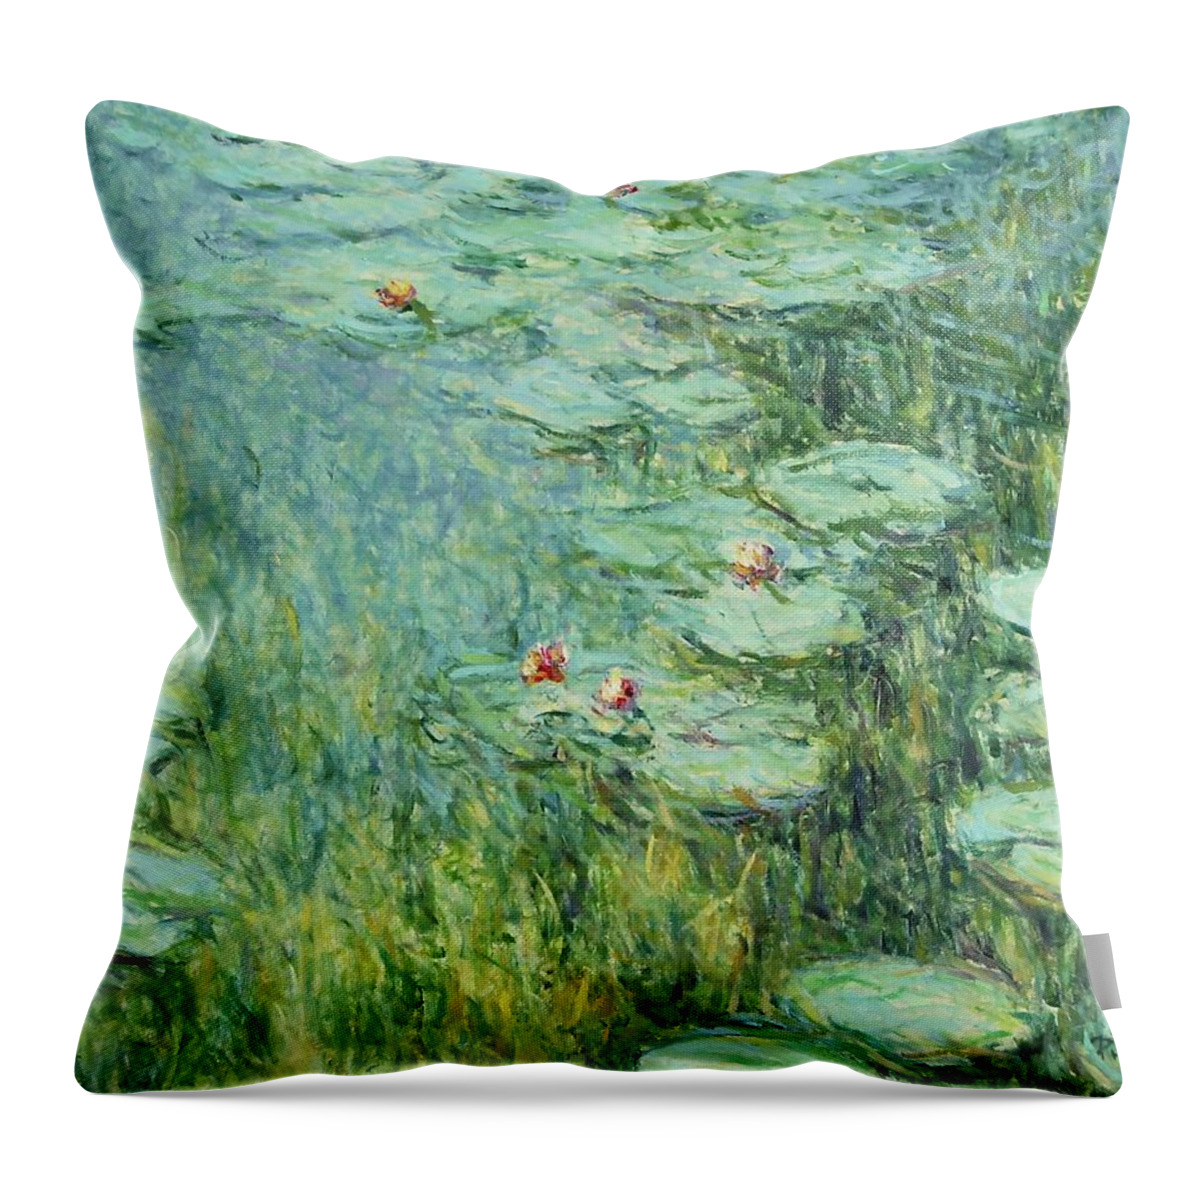 Water Lilies Throw Pillow featuring the painting Waterlelie Nymphaea Nr.31 by Pierre Dijk